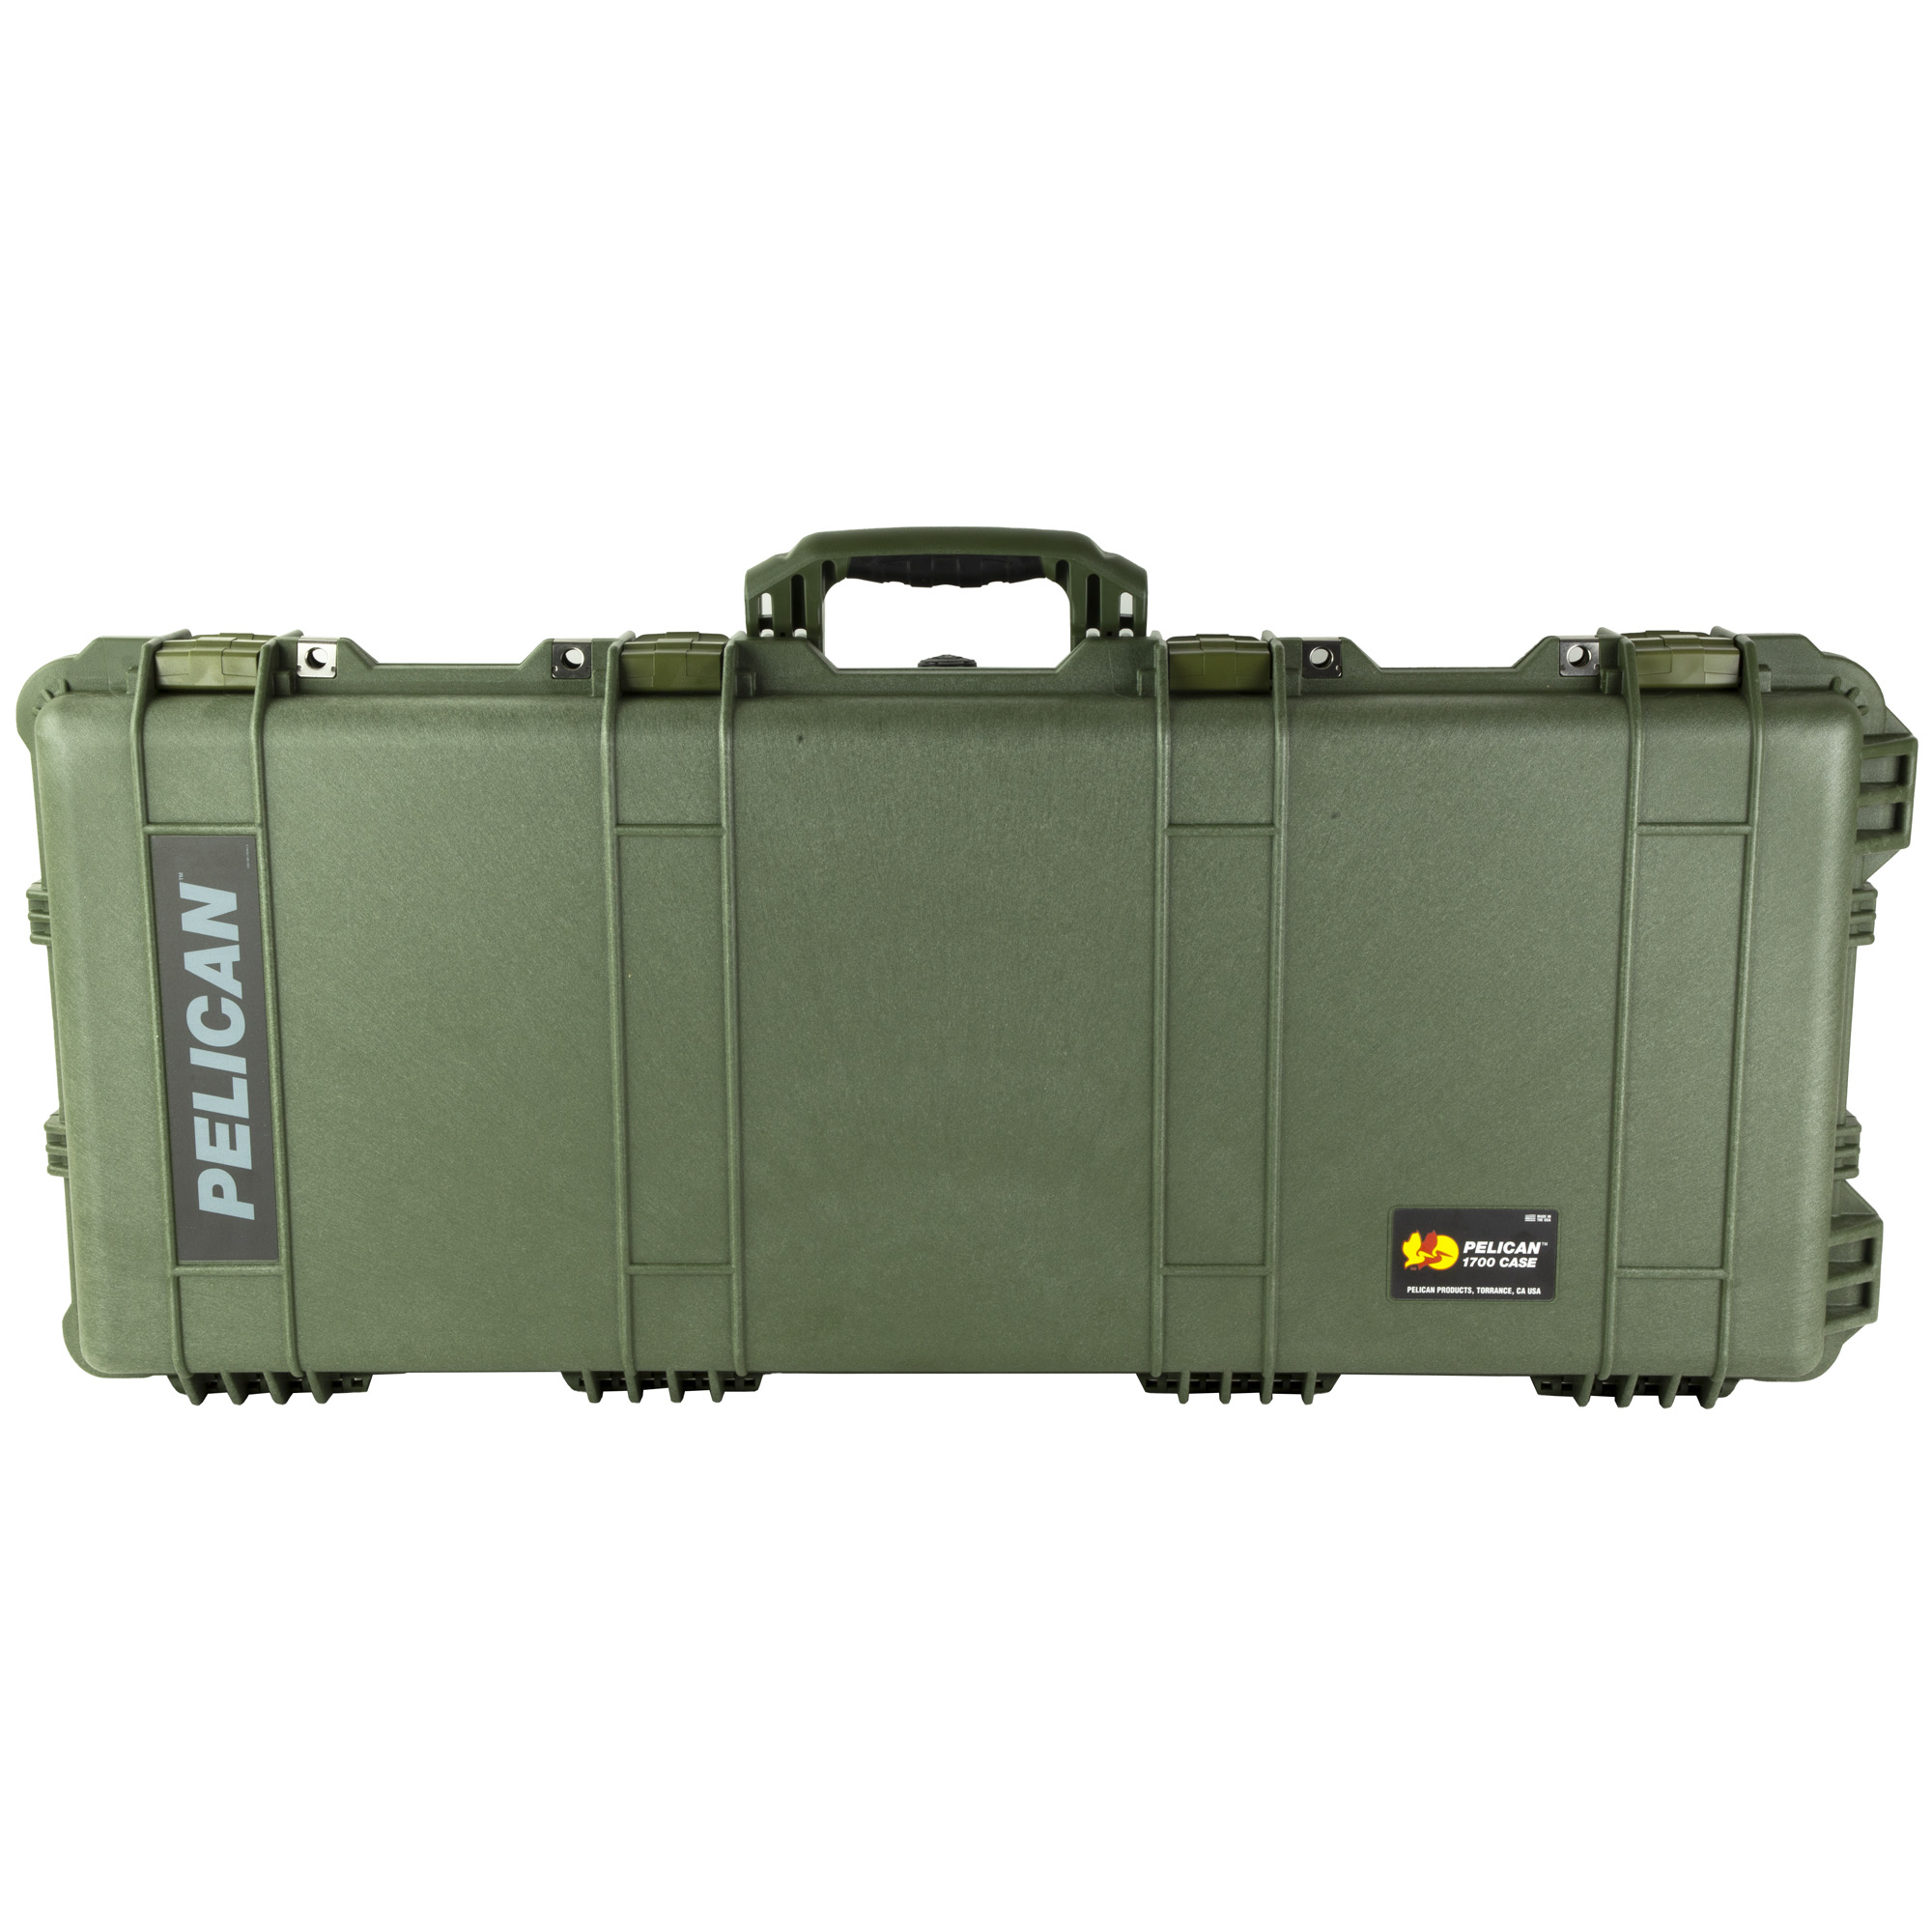 Pelican 1700 Protector Long Case with Foam  (OD Green), MPN # 017000-0000-130, UPC: 019428181826